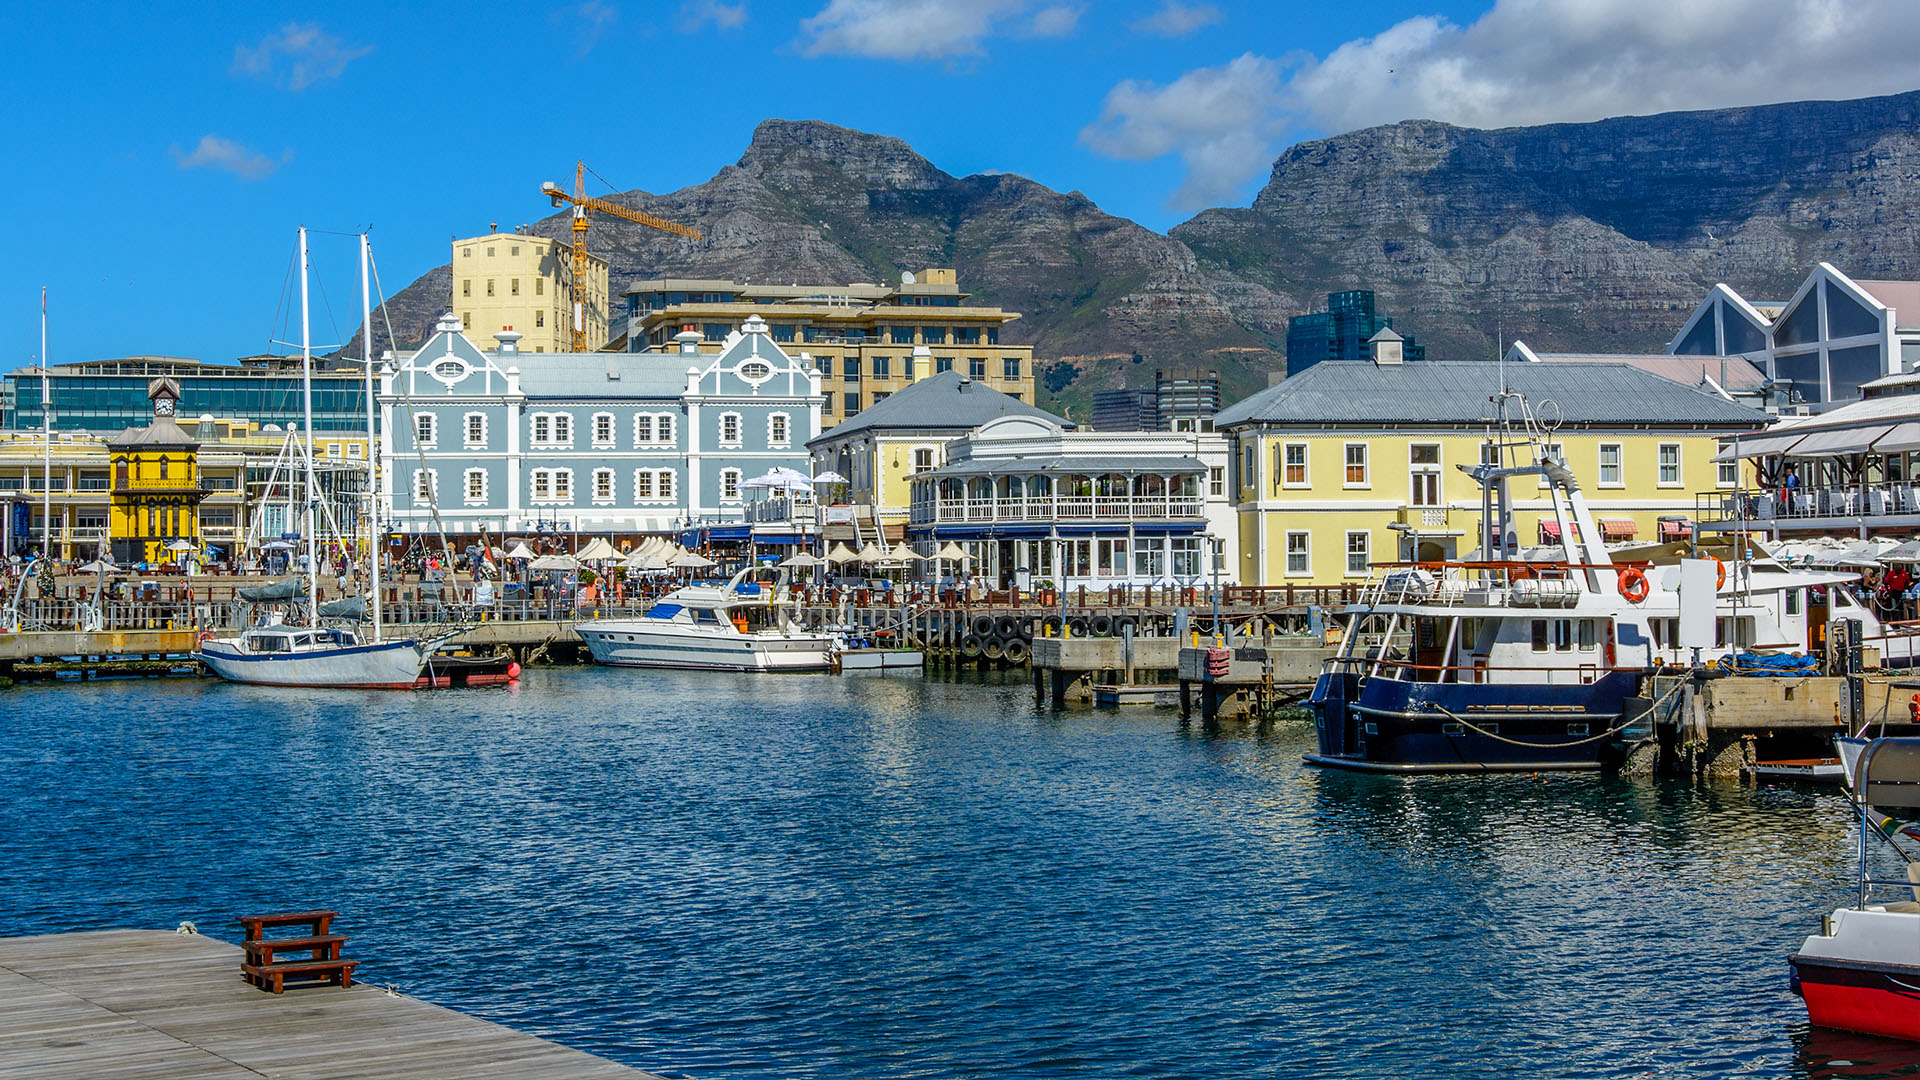 Buildings that elevated cities: V&A Waterfront